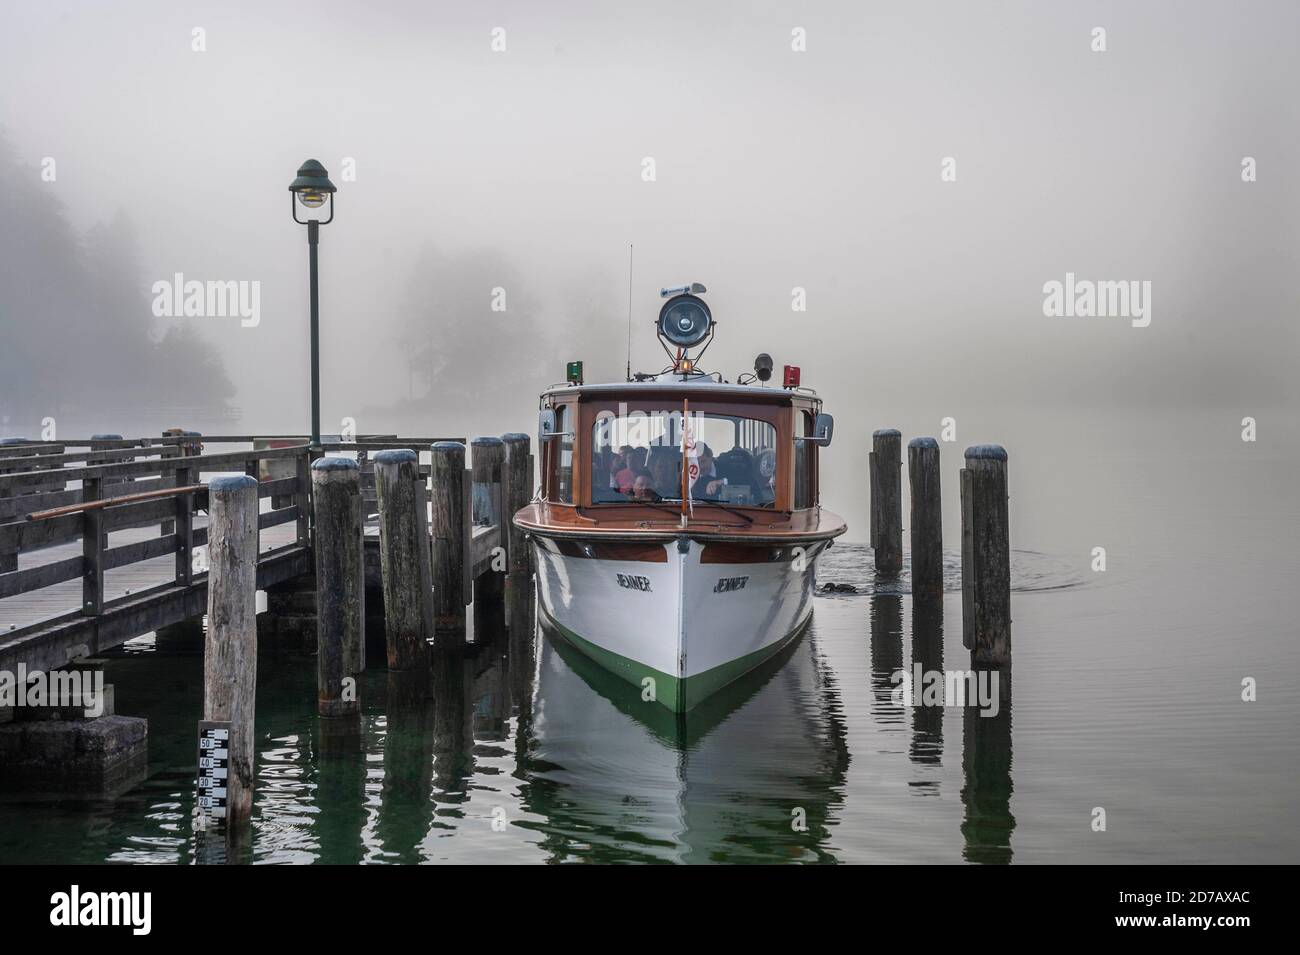 GERMANY, Berchtesgaden, Königssee, excursion boat with electric engine, ready to leave the jetty during a hazy early morning Stock Photo